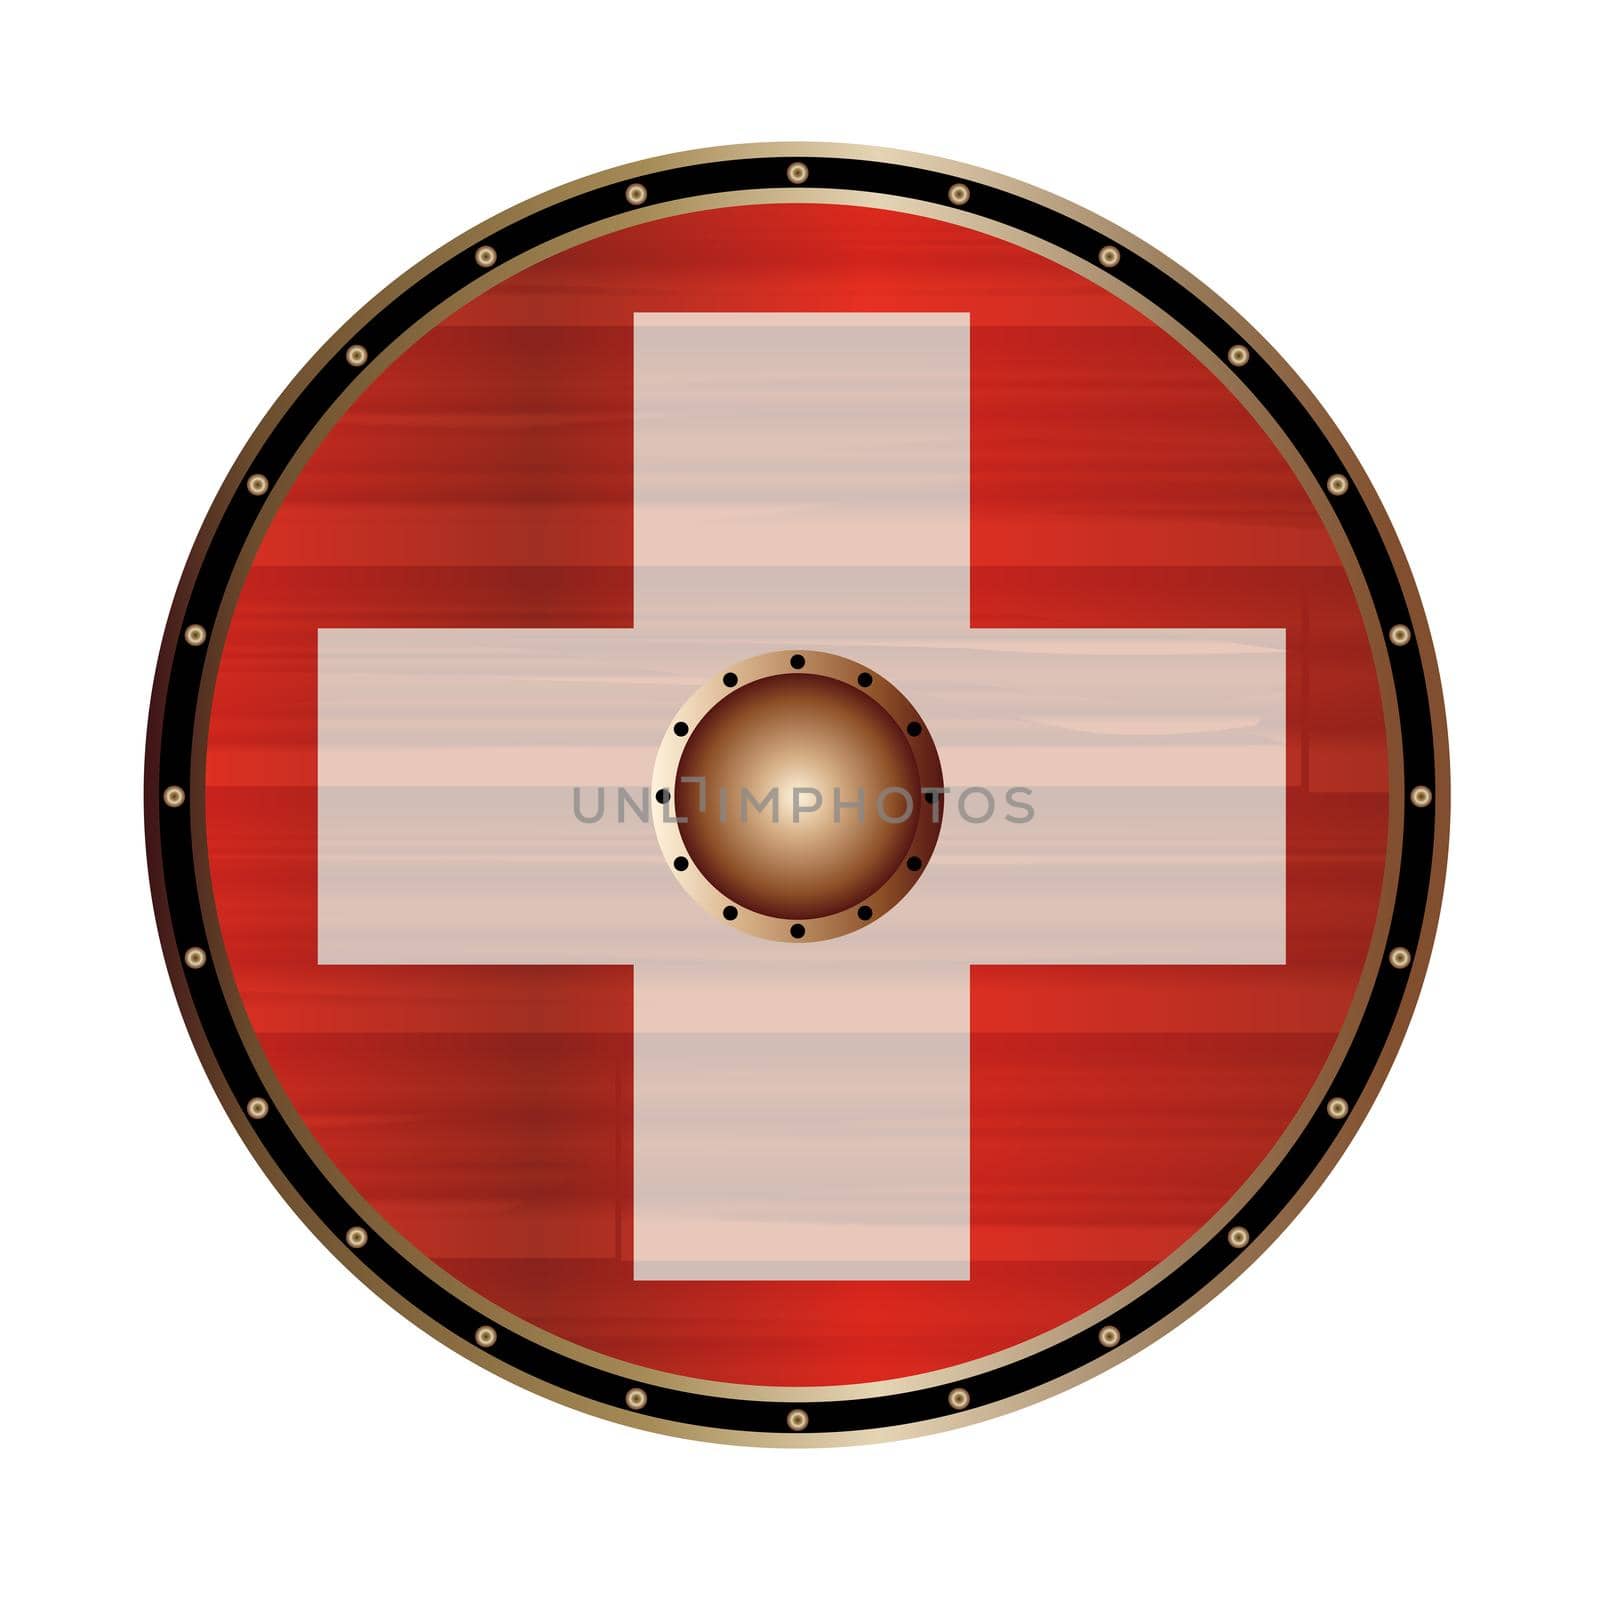 A Viking round shield with the Switzerland flag color design isolated on a white background